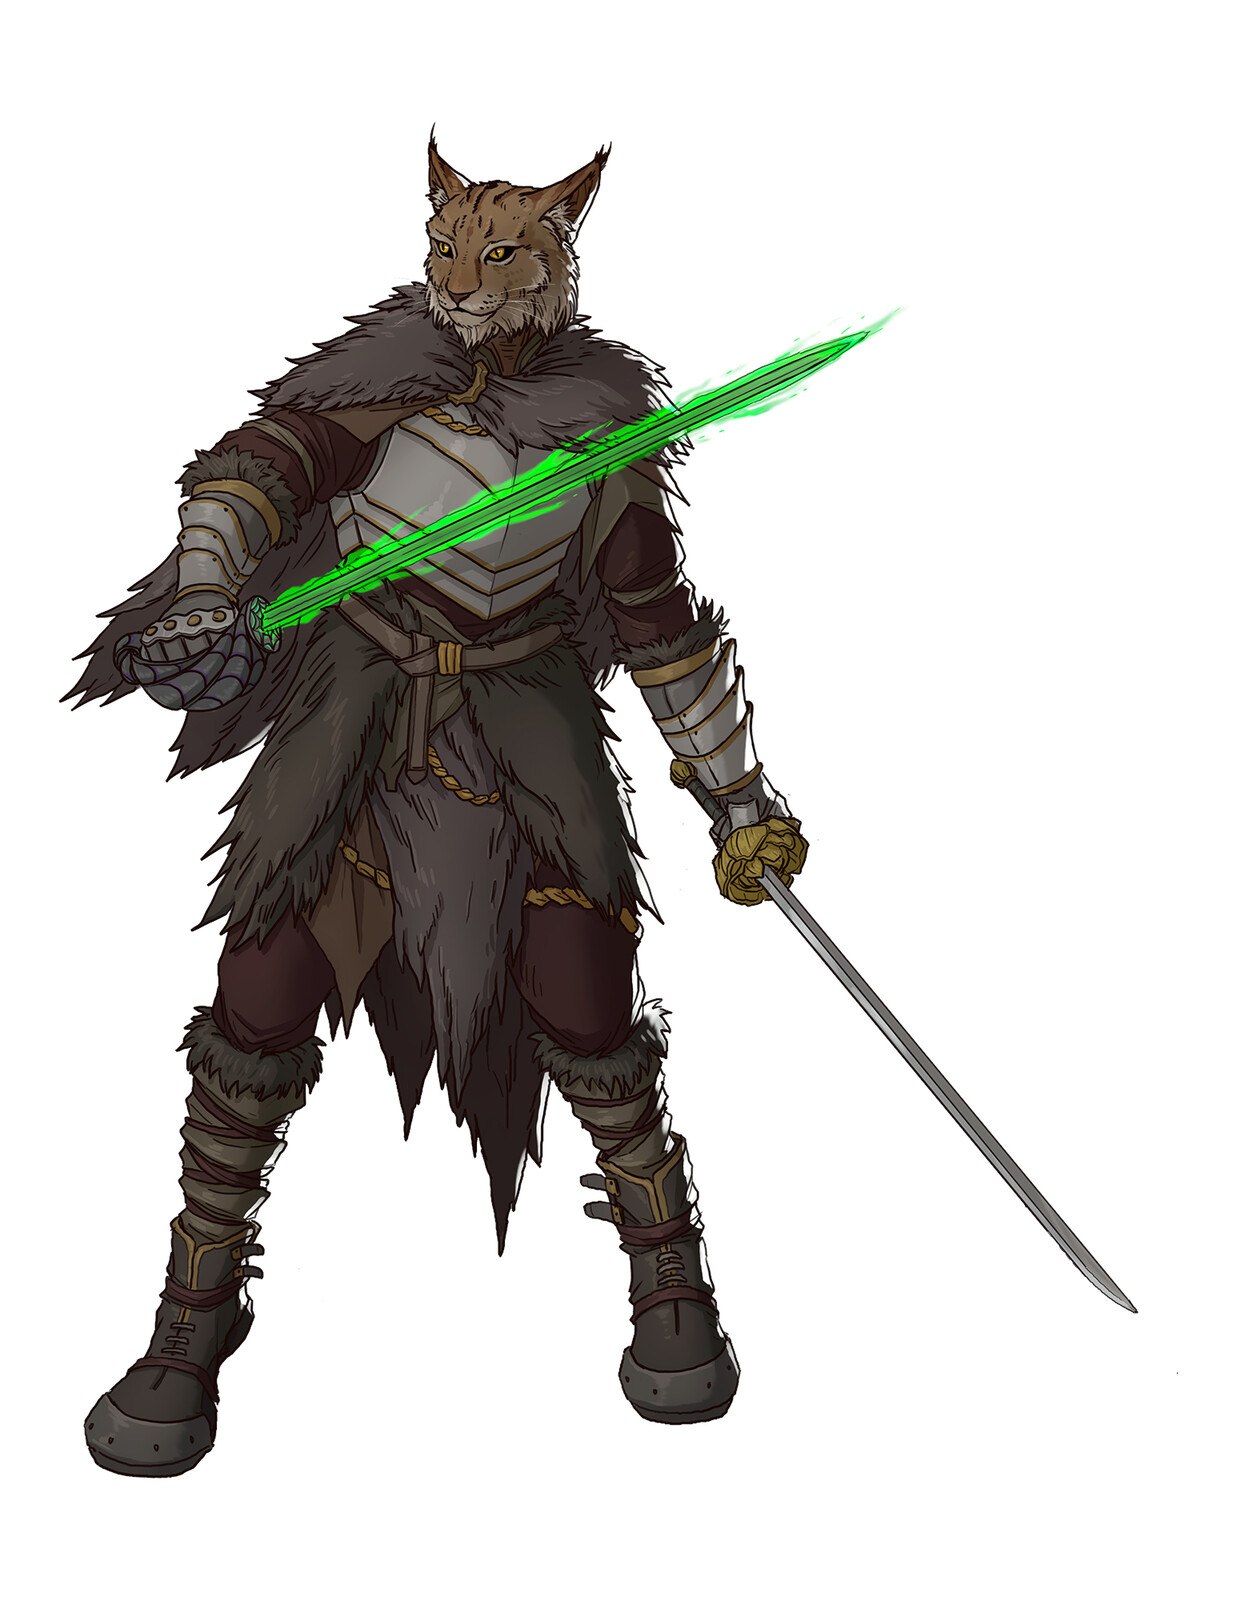 Coursing River, Tabaxi Fighter.